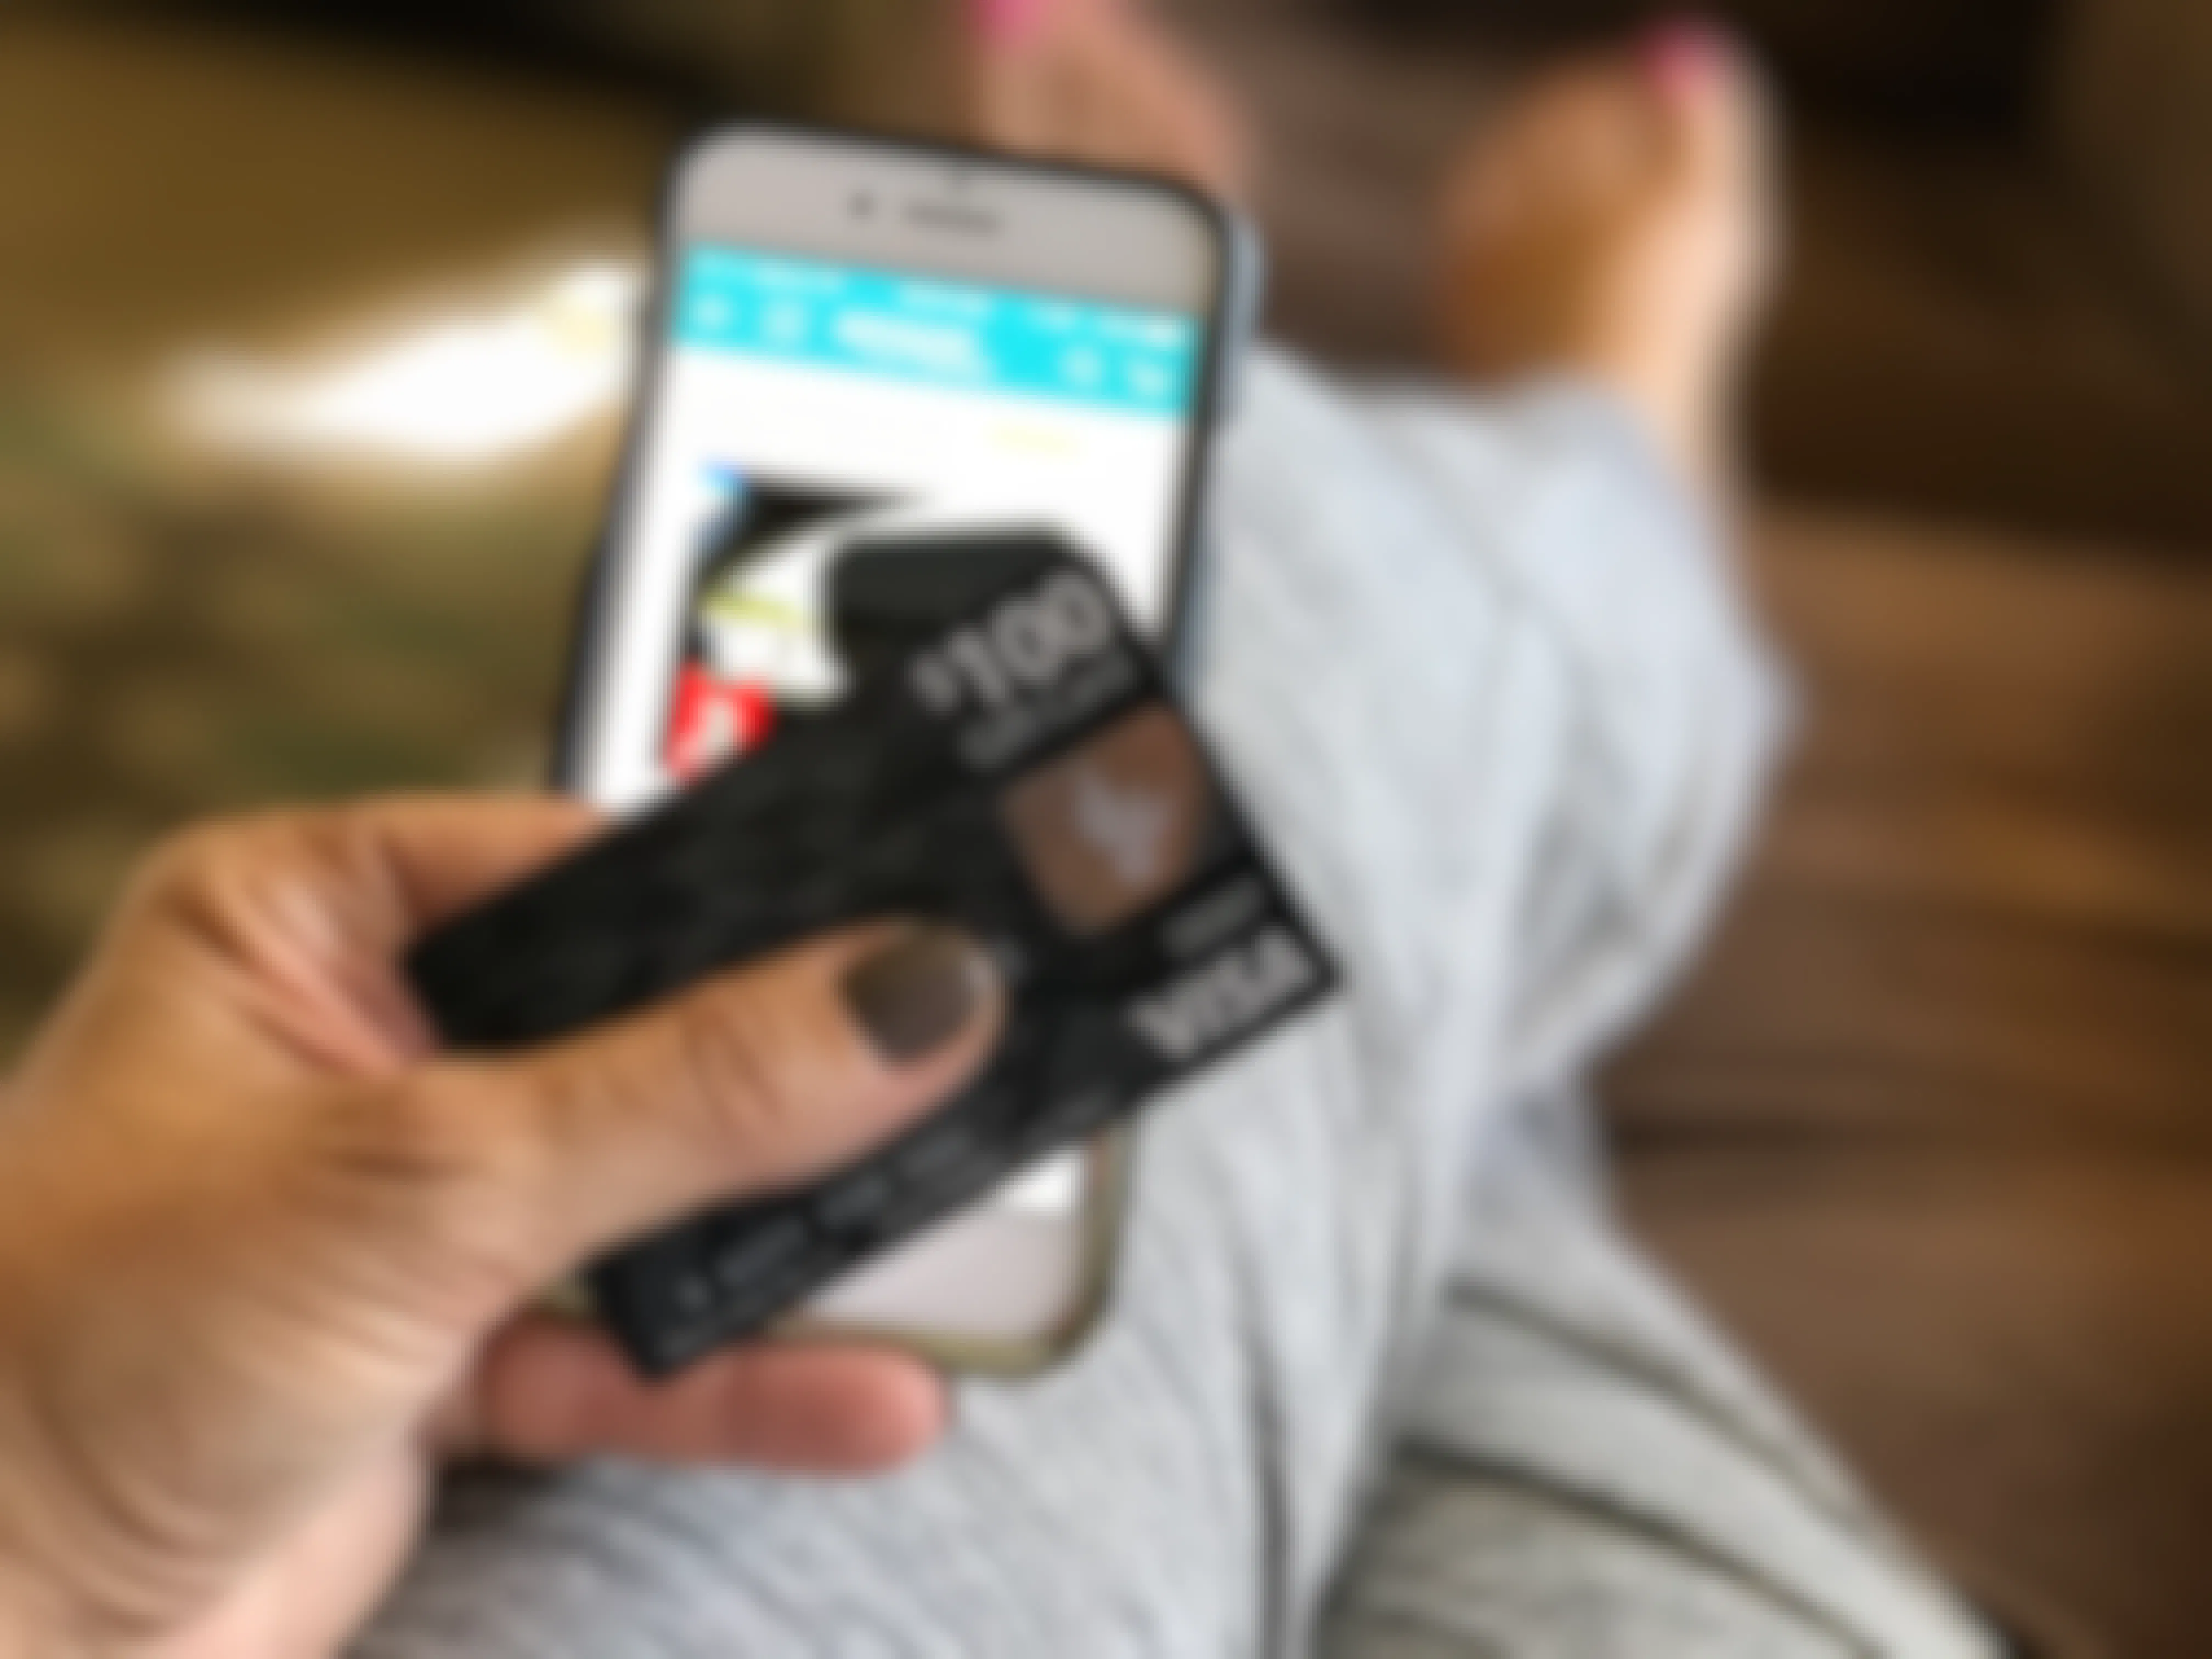 earn free gift cards - A person holding prepaid visa gift card next to phone with amazon app open